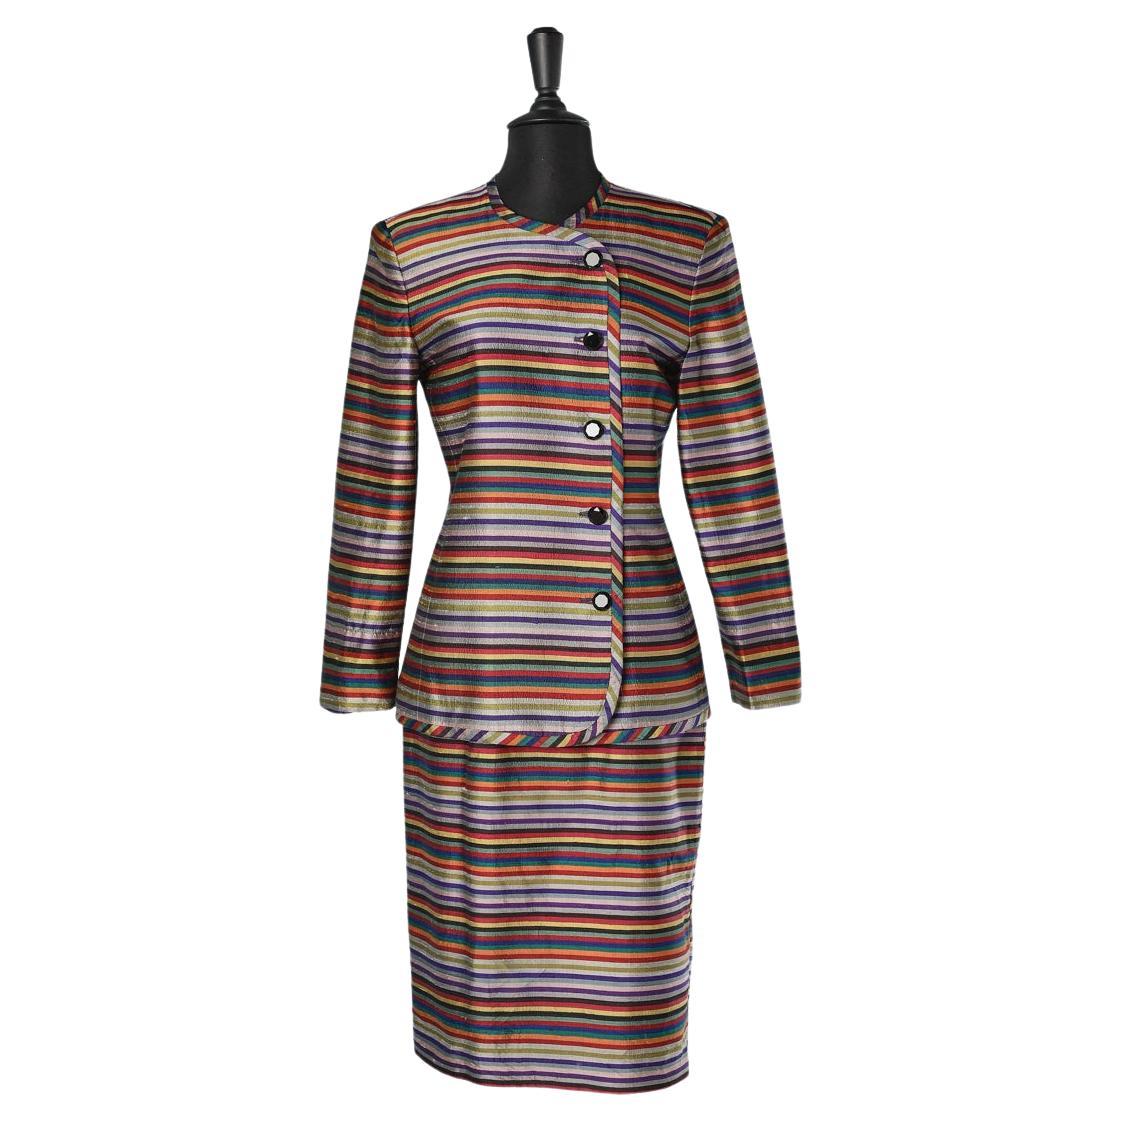  Multicolor stripes  cocktail skirt-suit in raw silk Christian Dior 